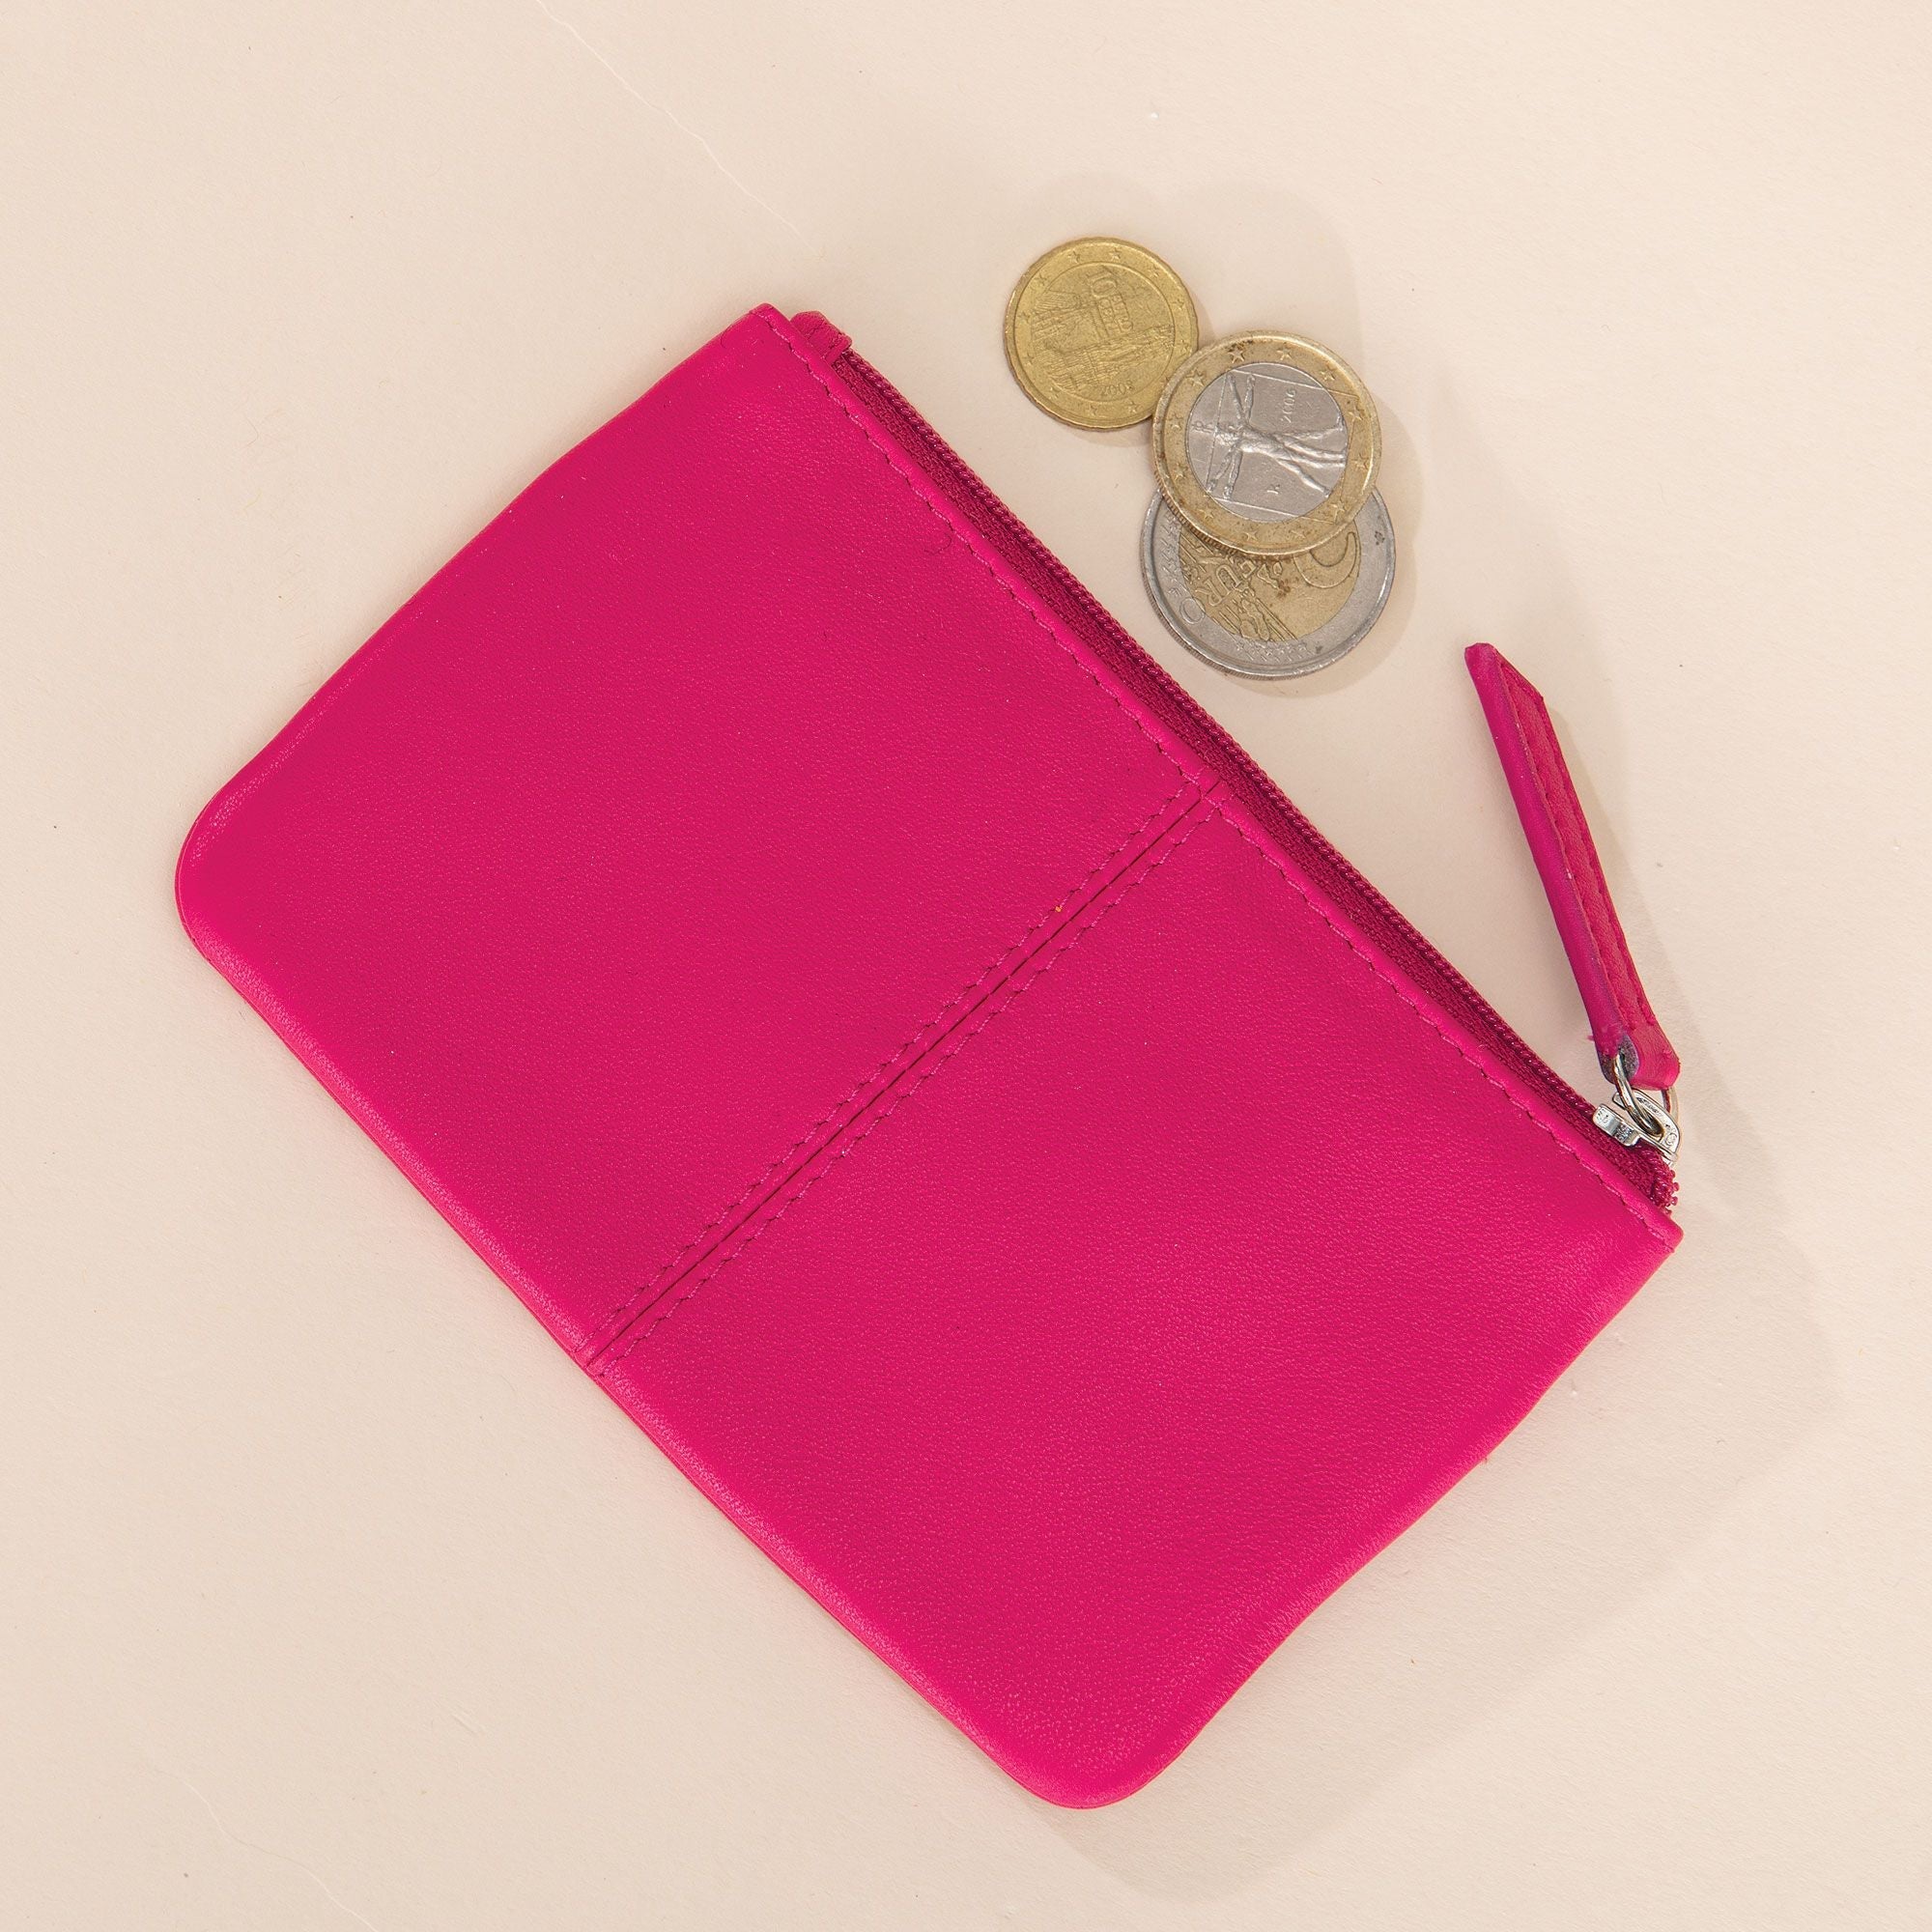 Watermelon Pink Leather Coin Purse